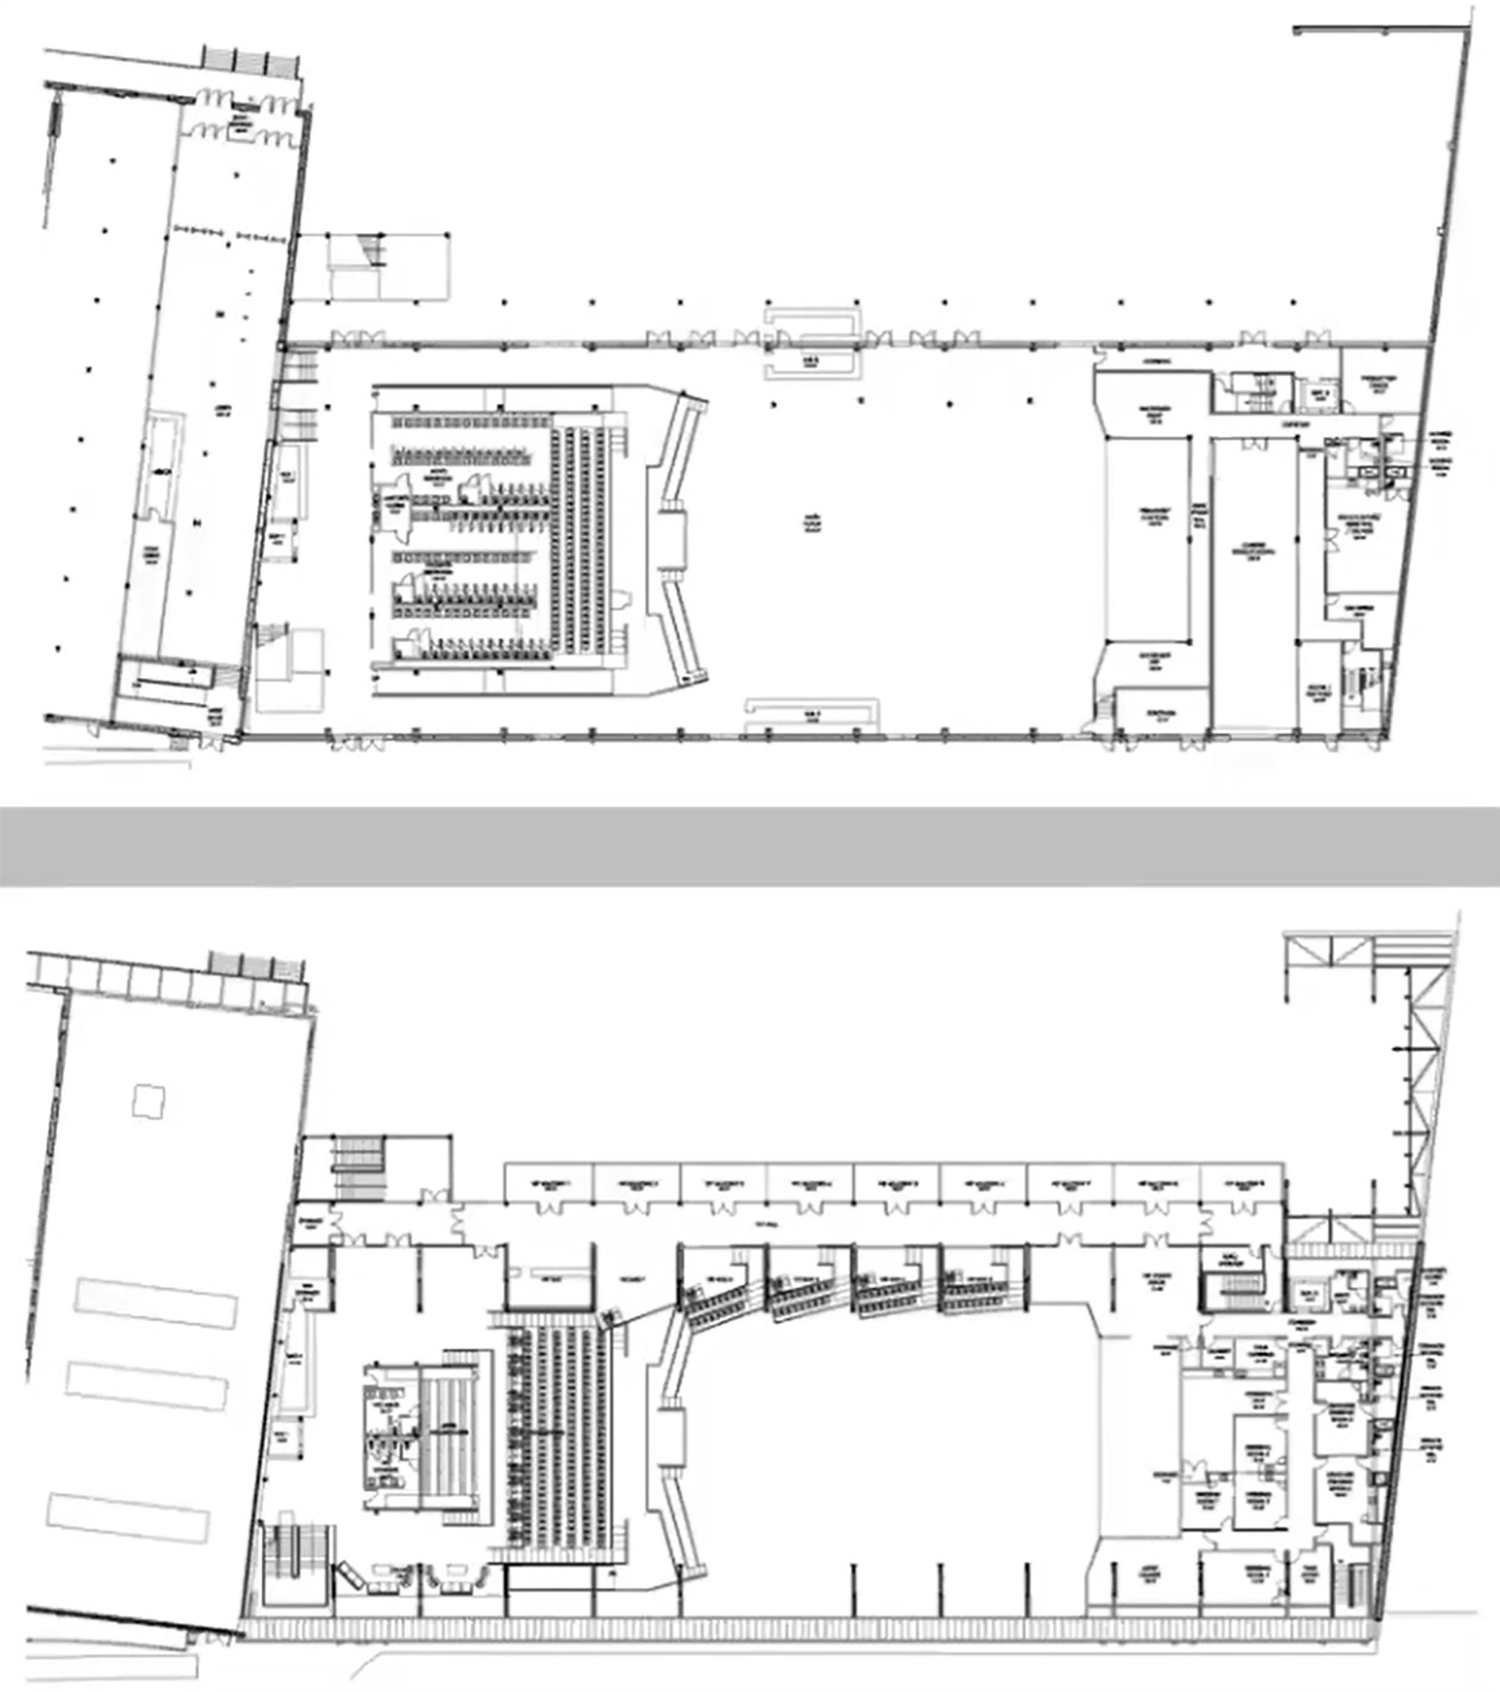 Shed Building Floor Plans. Drawings by Lamar Johnson Collaborative